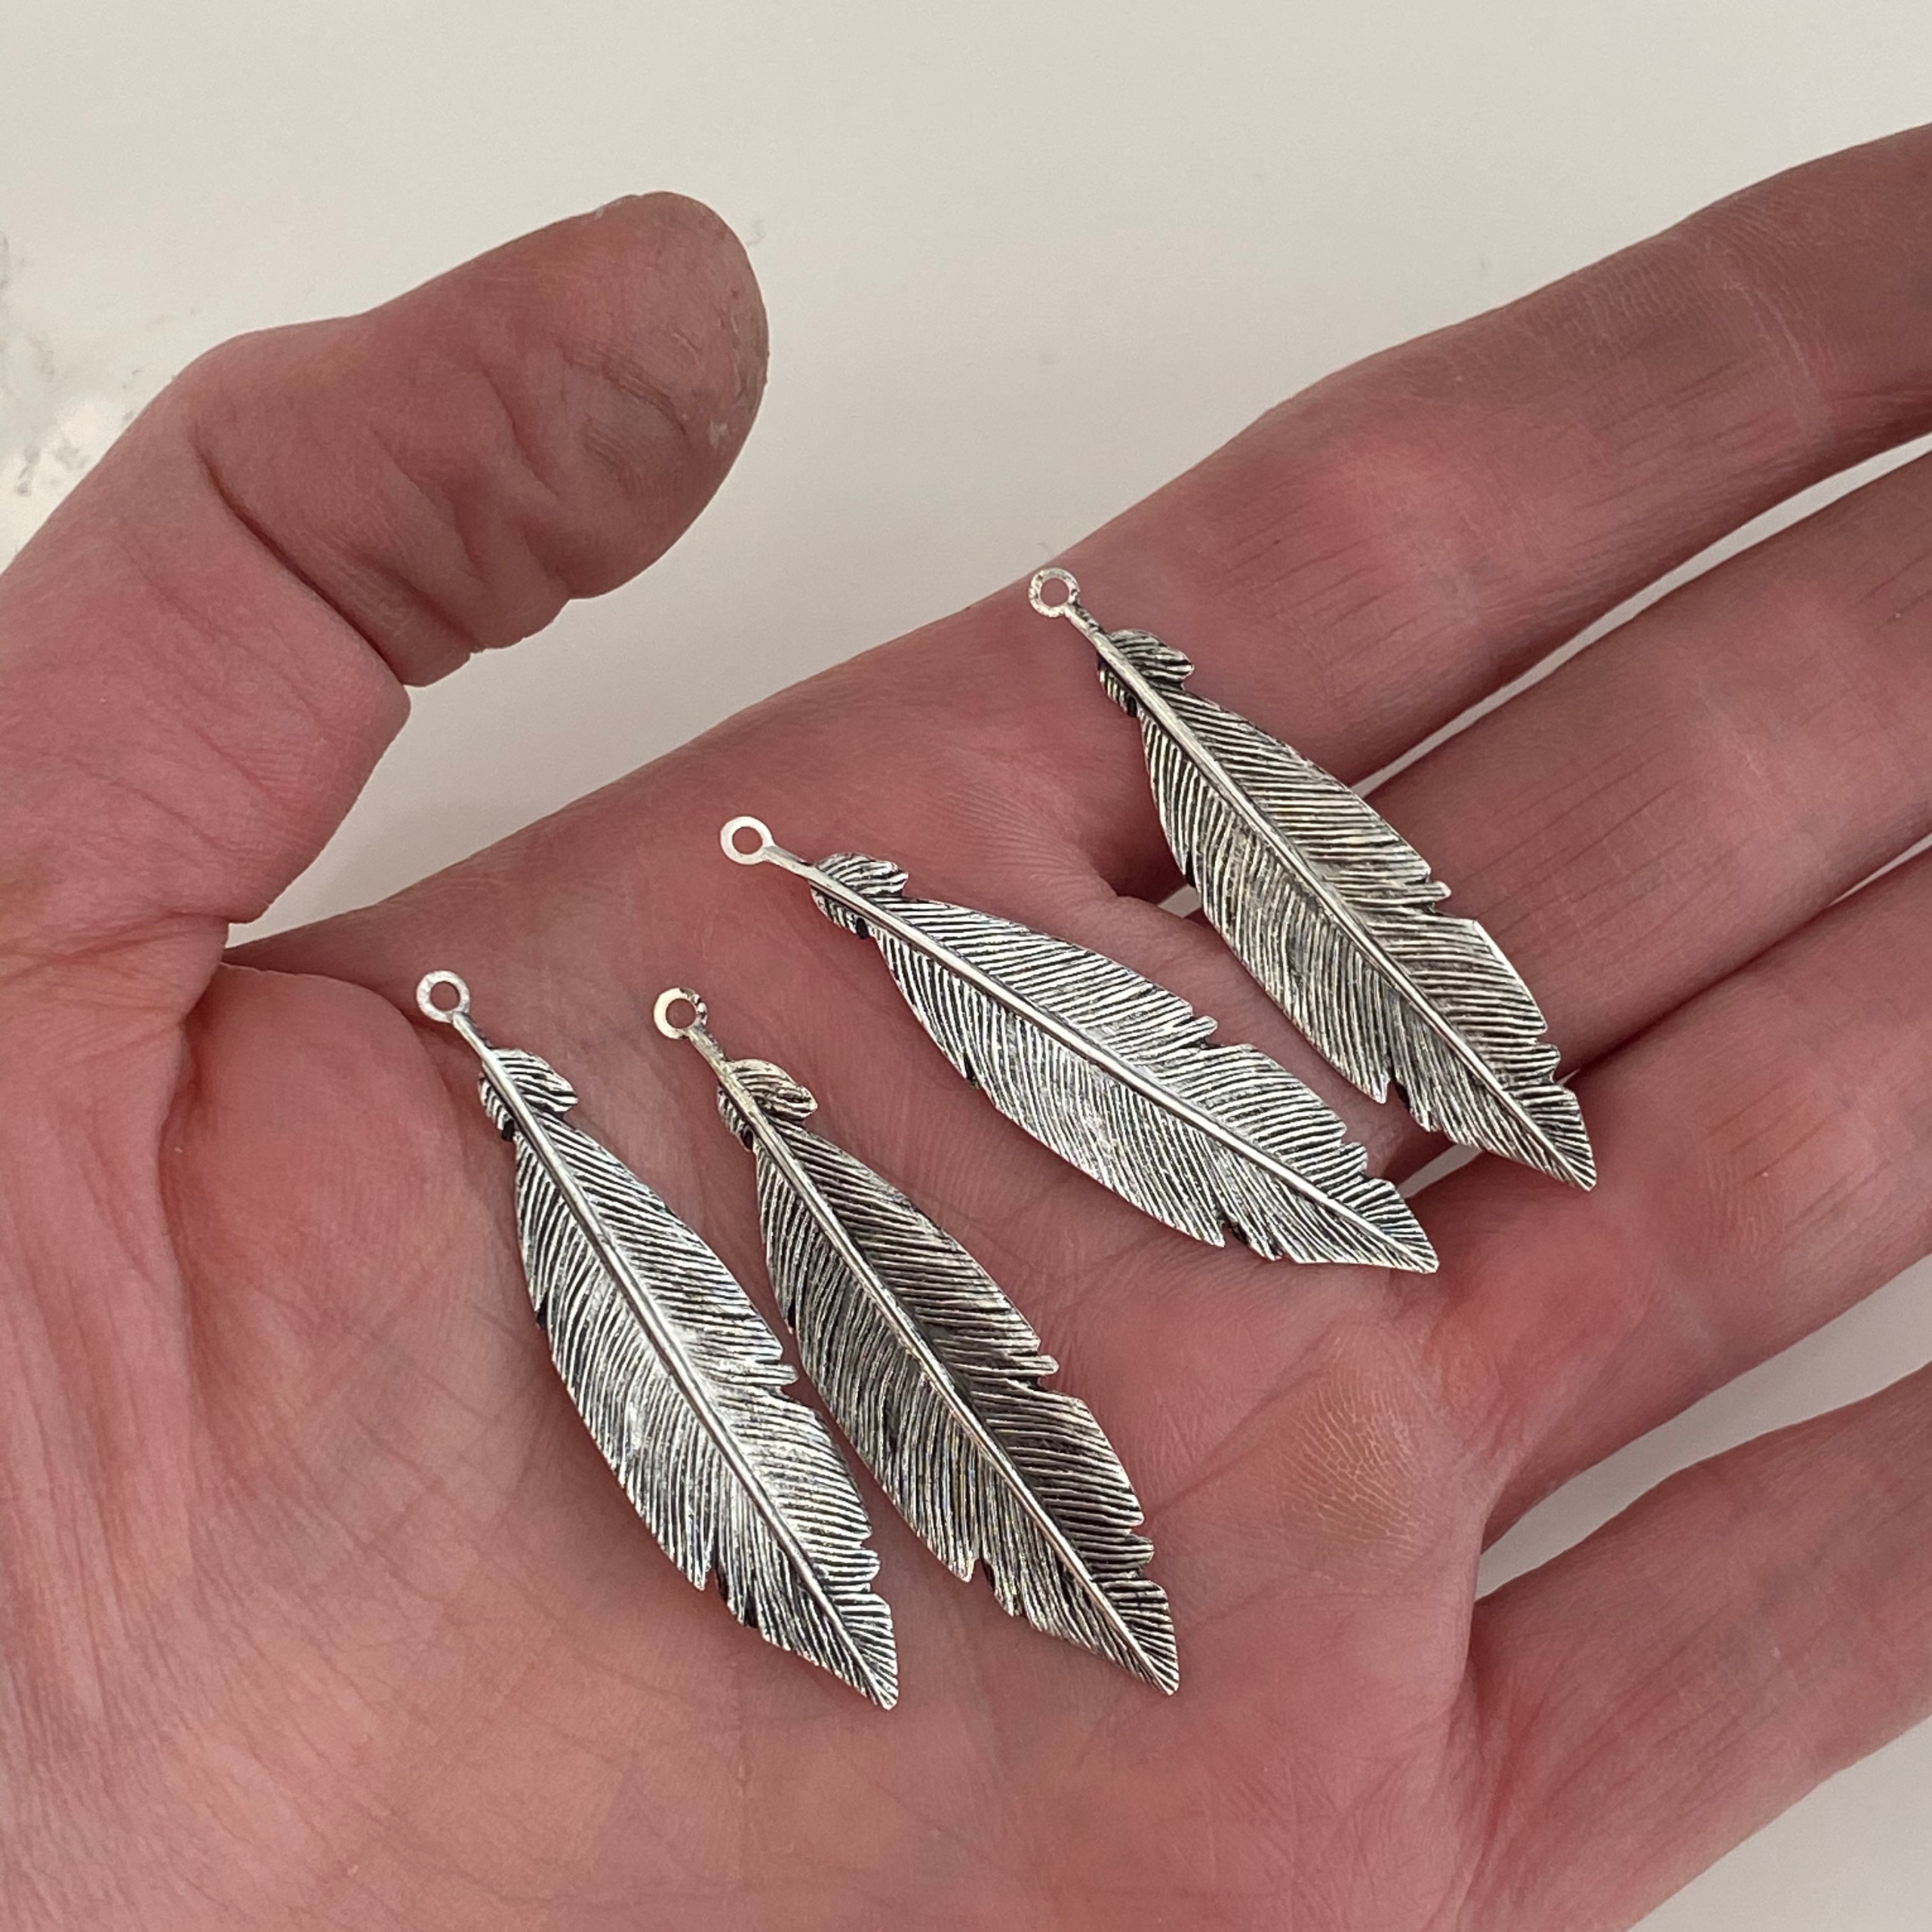 50633 Antique Silver Alloy Peacock Feather Pendant Charm Jewelry Craft 8pcs 